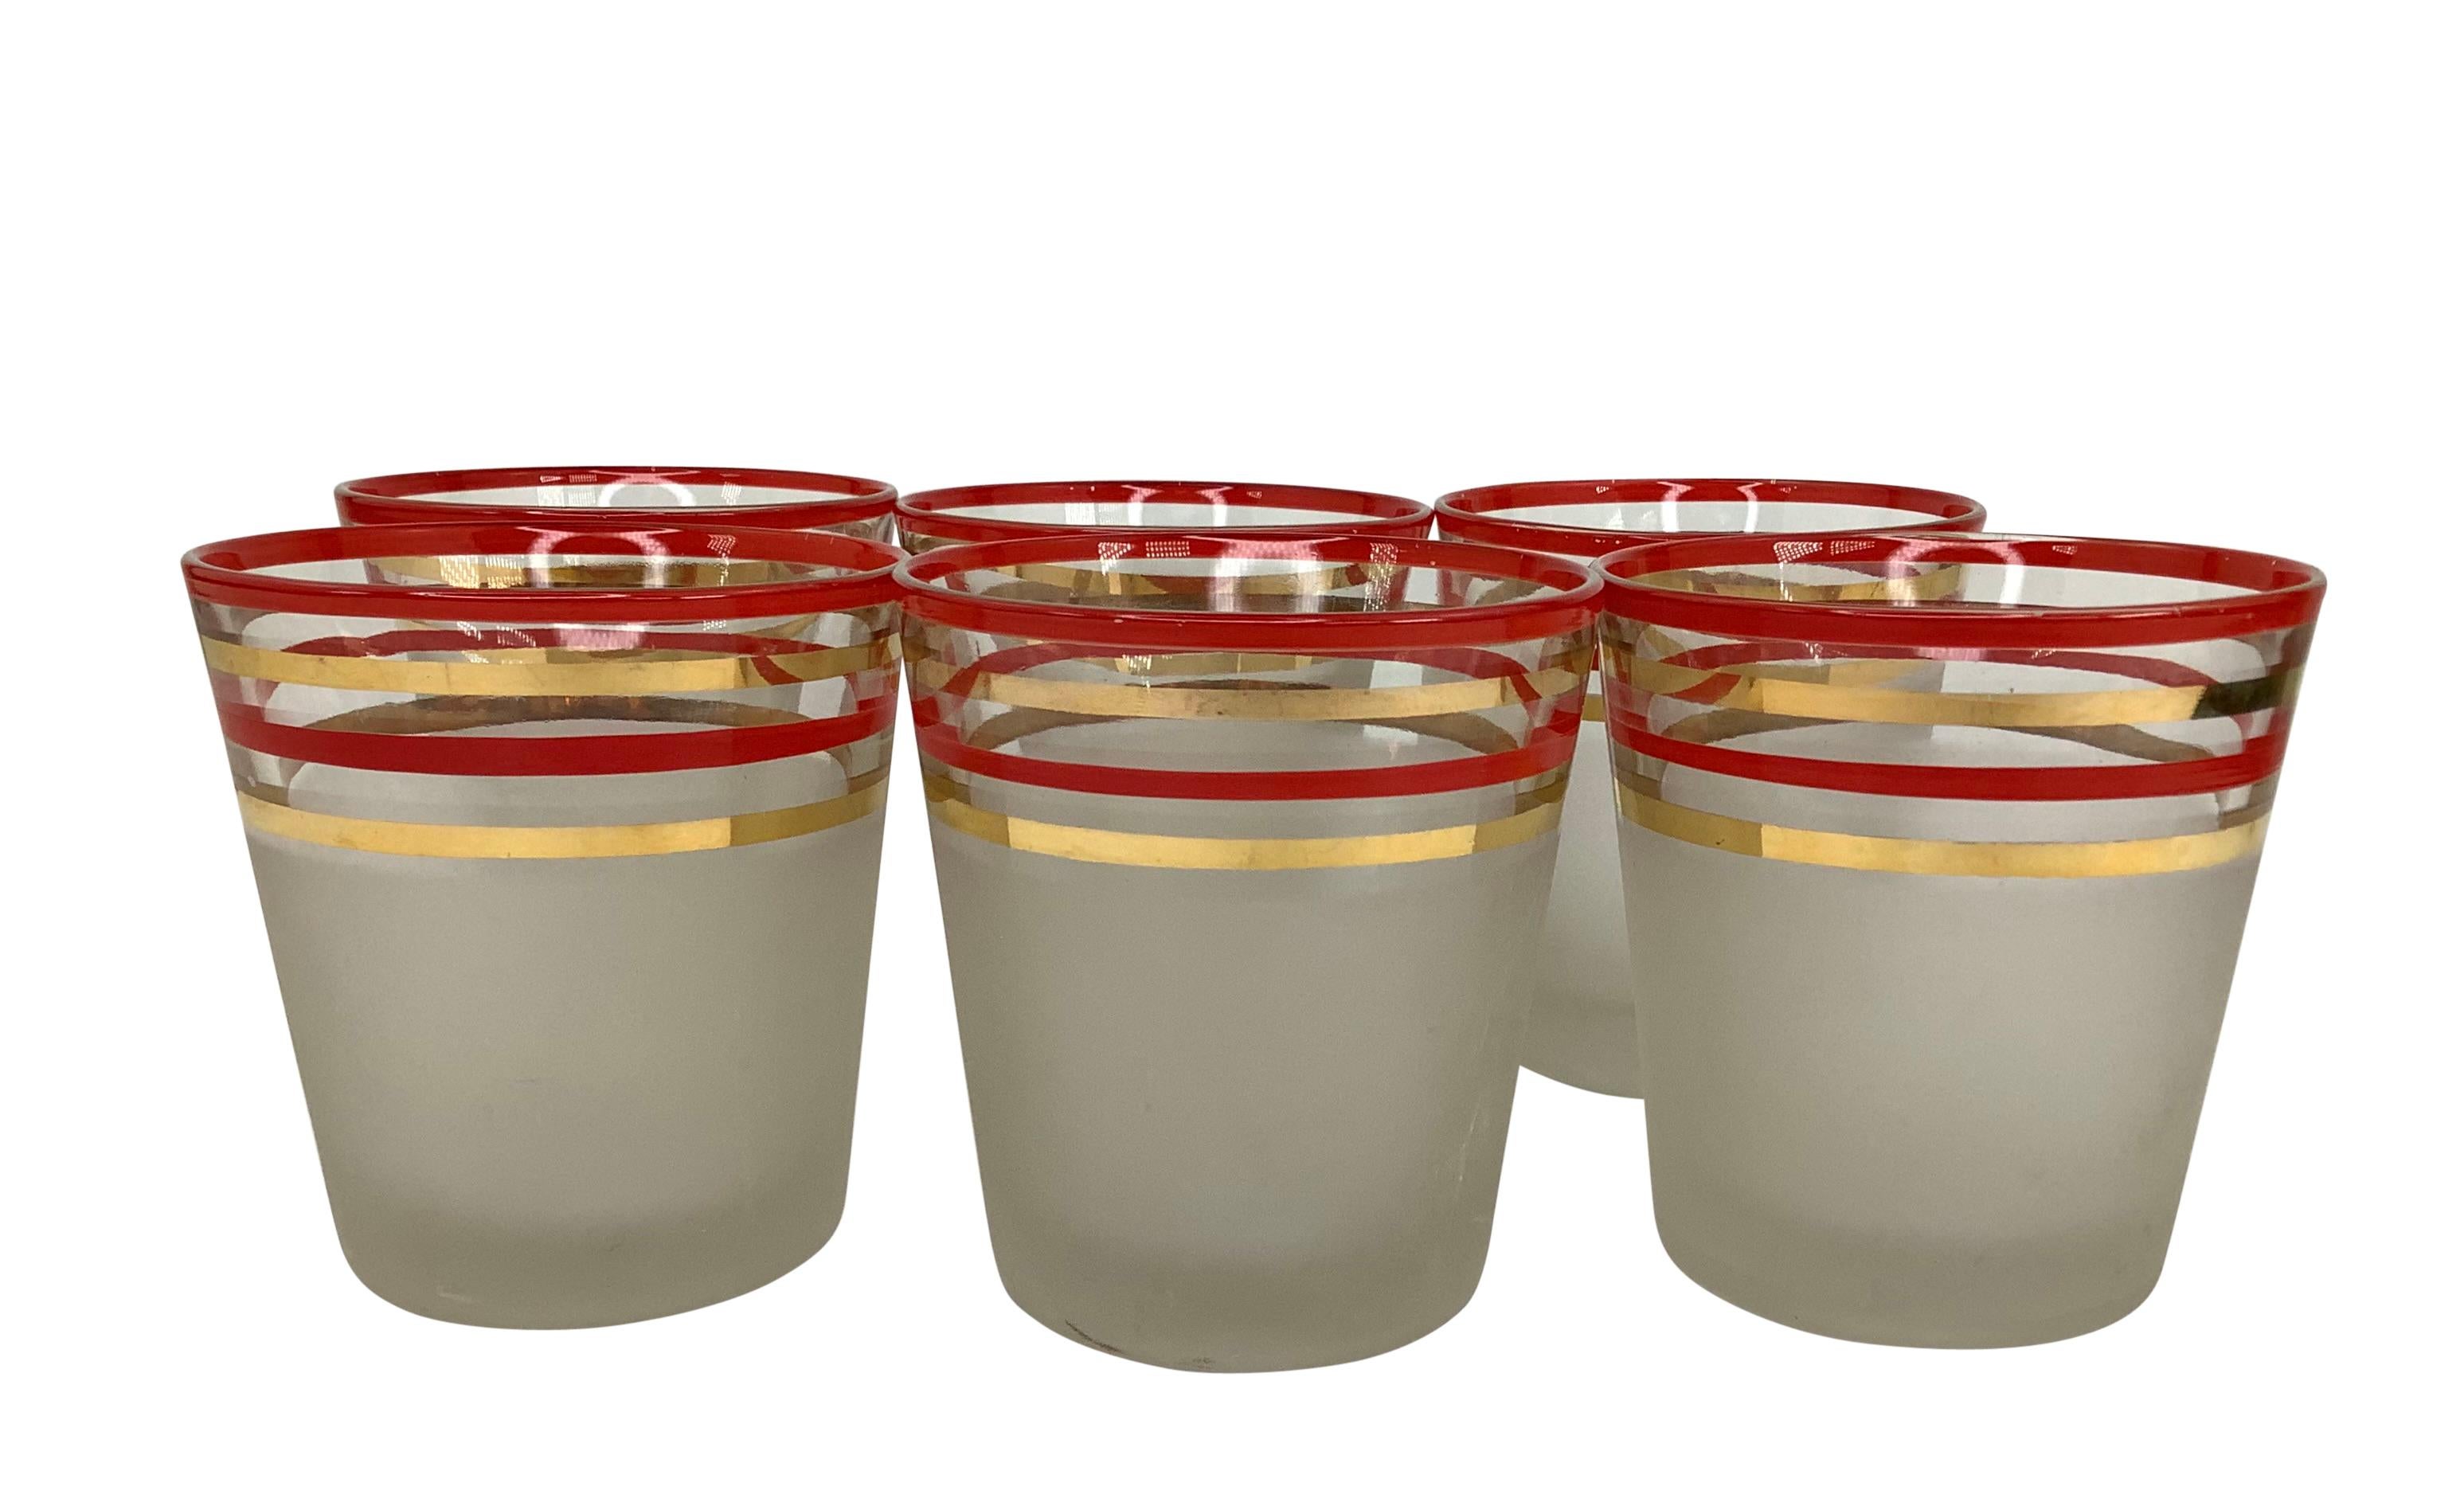 Old Fashioned Rocks Frosted Cocktail Glasses With Red and Gold Bands - Set of 6